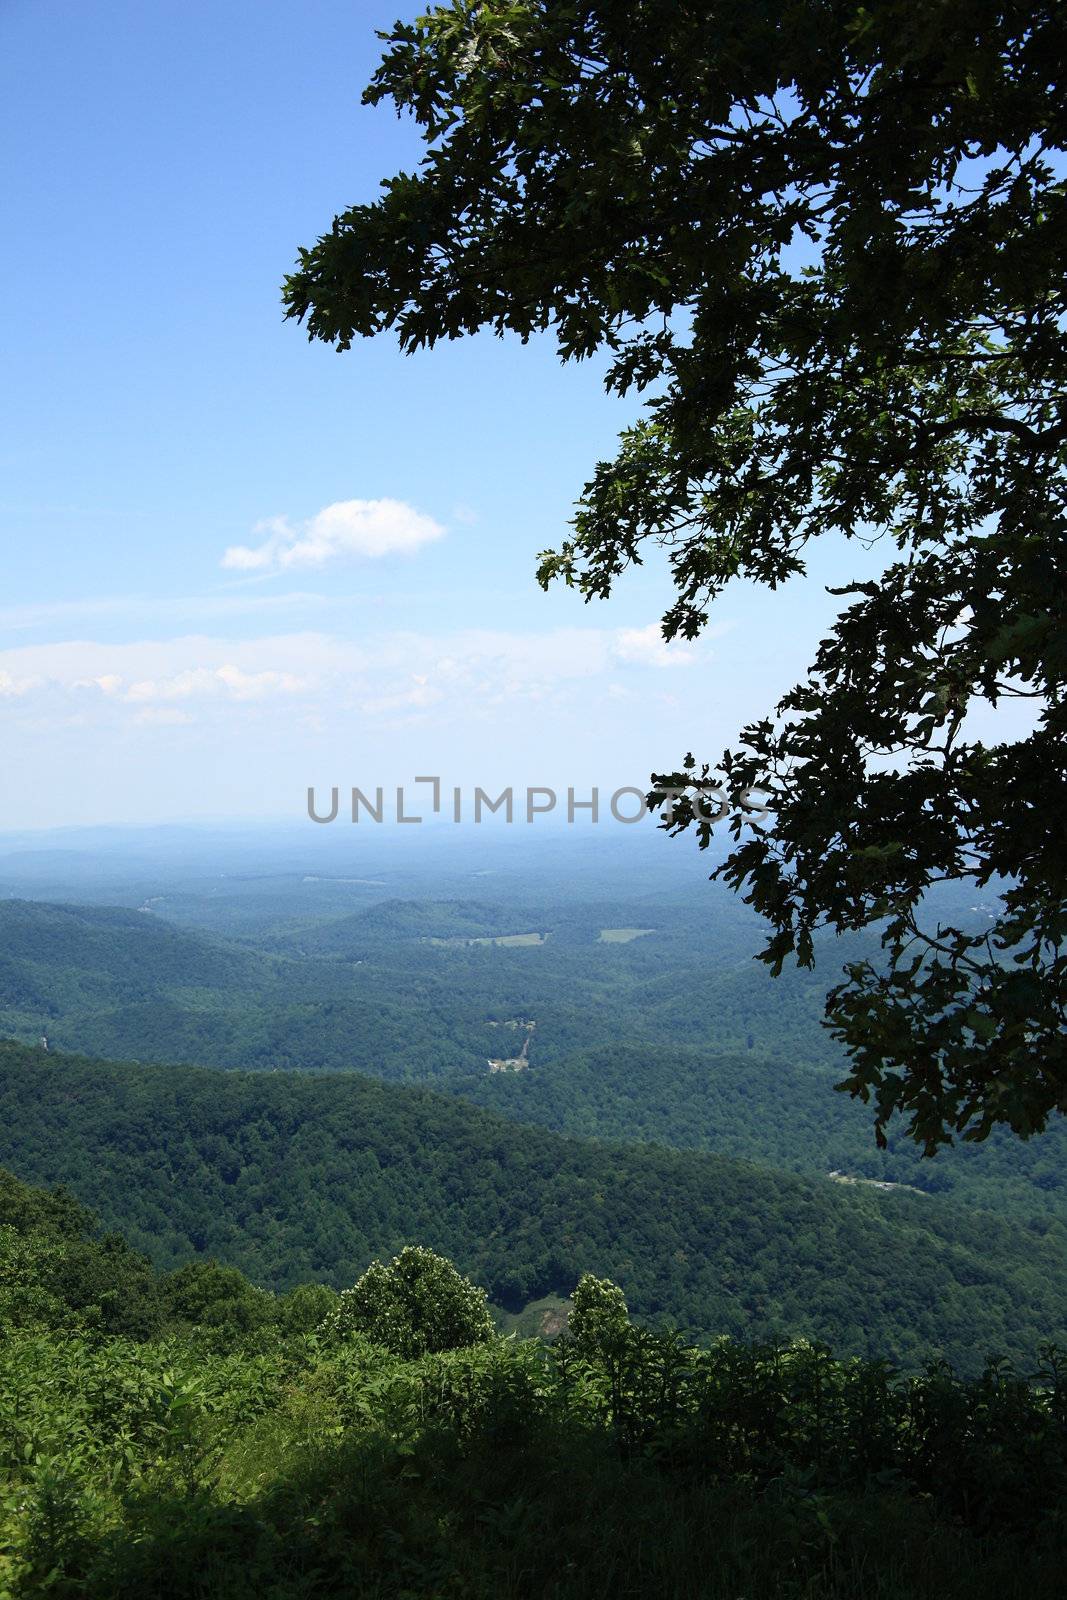 Blue Ridge Mountains - Virginia by Ffooter